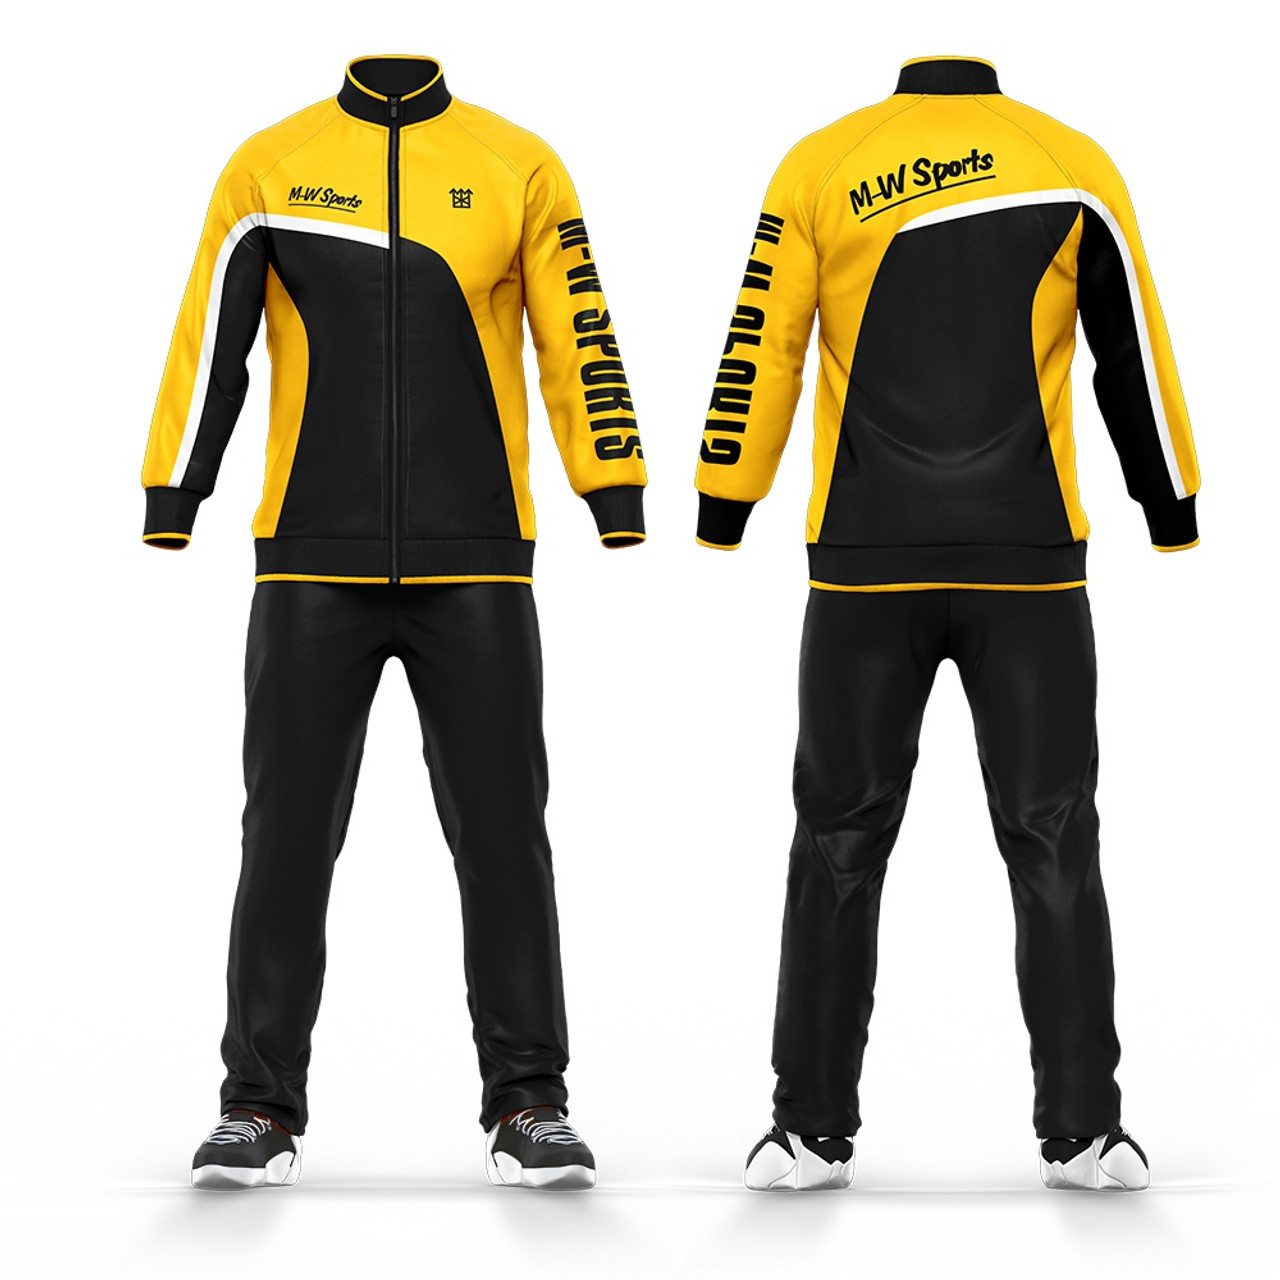 Men Large Micro Sports Playing Sublimation Track Suit. at Rs 1150